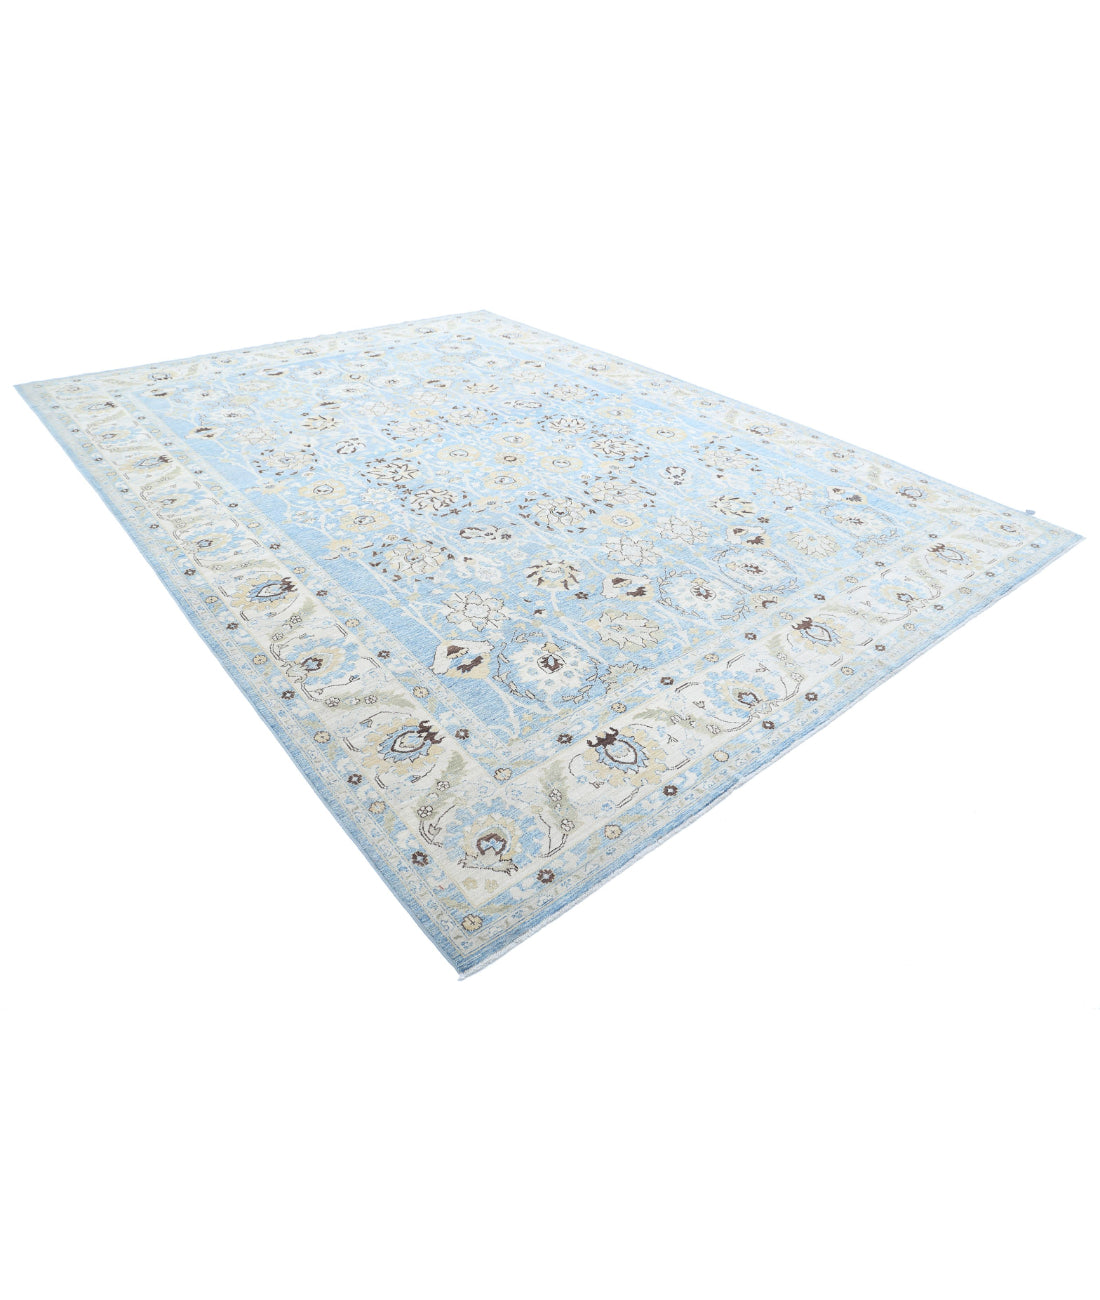 Serenity 10'1'' X 13'4'' Hand-Knotted Wool Rug 10'1'' x 13'4'' (303 X 400) / Teal / Ivory